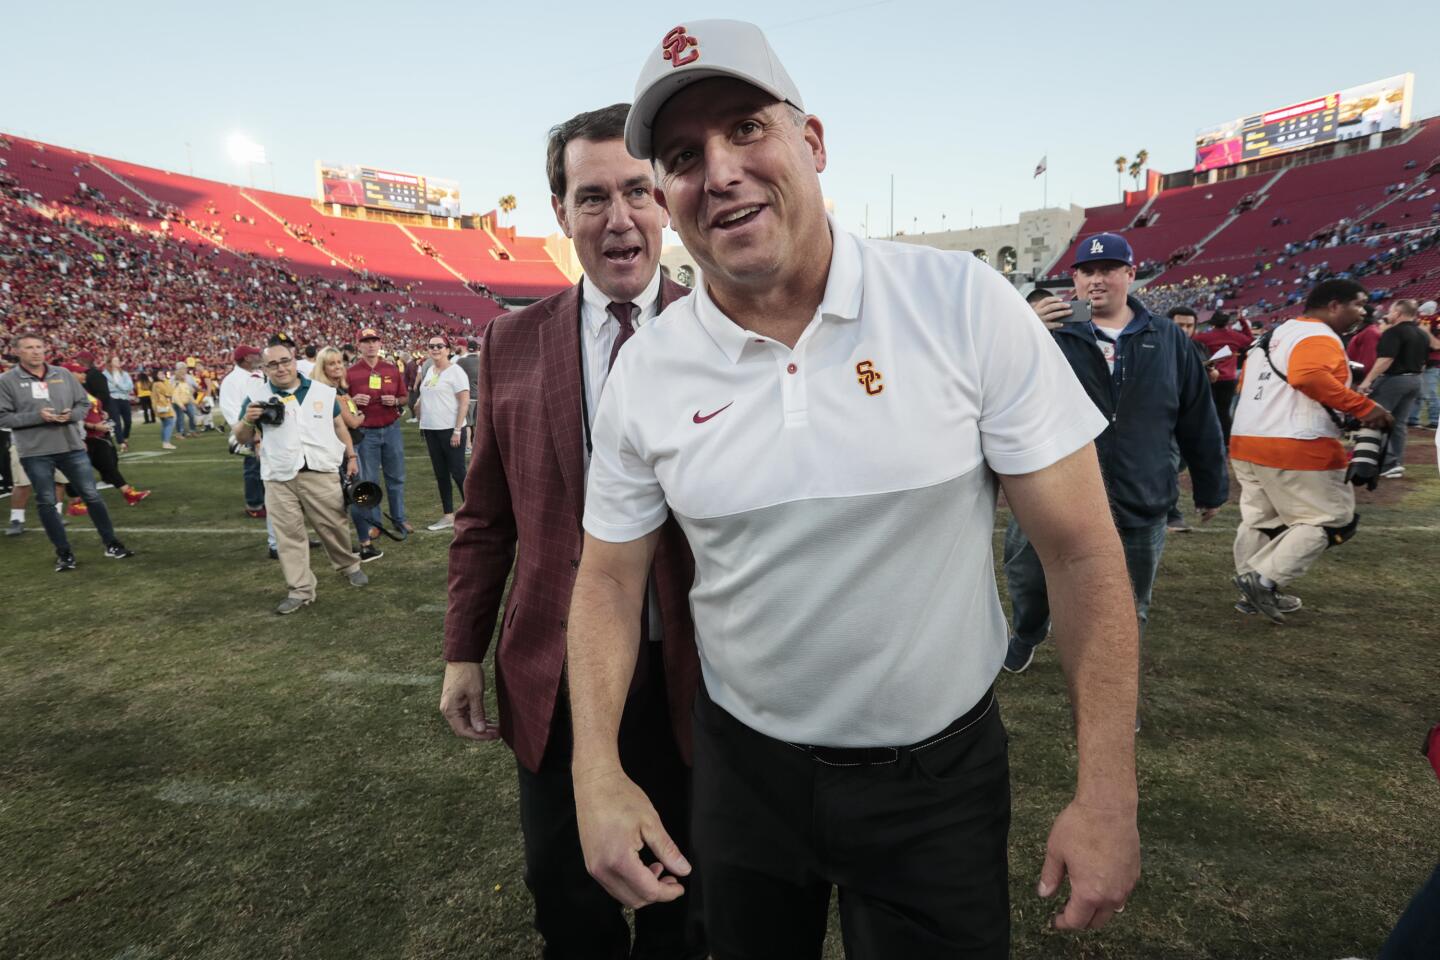 USC head coach Clay Helton and Athletic Director Mike Bohn share a laugh together at midfield after a 52-35 win over UCLA at the Coliseum.